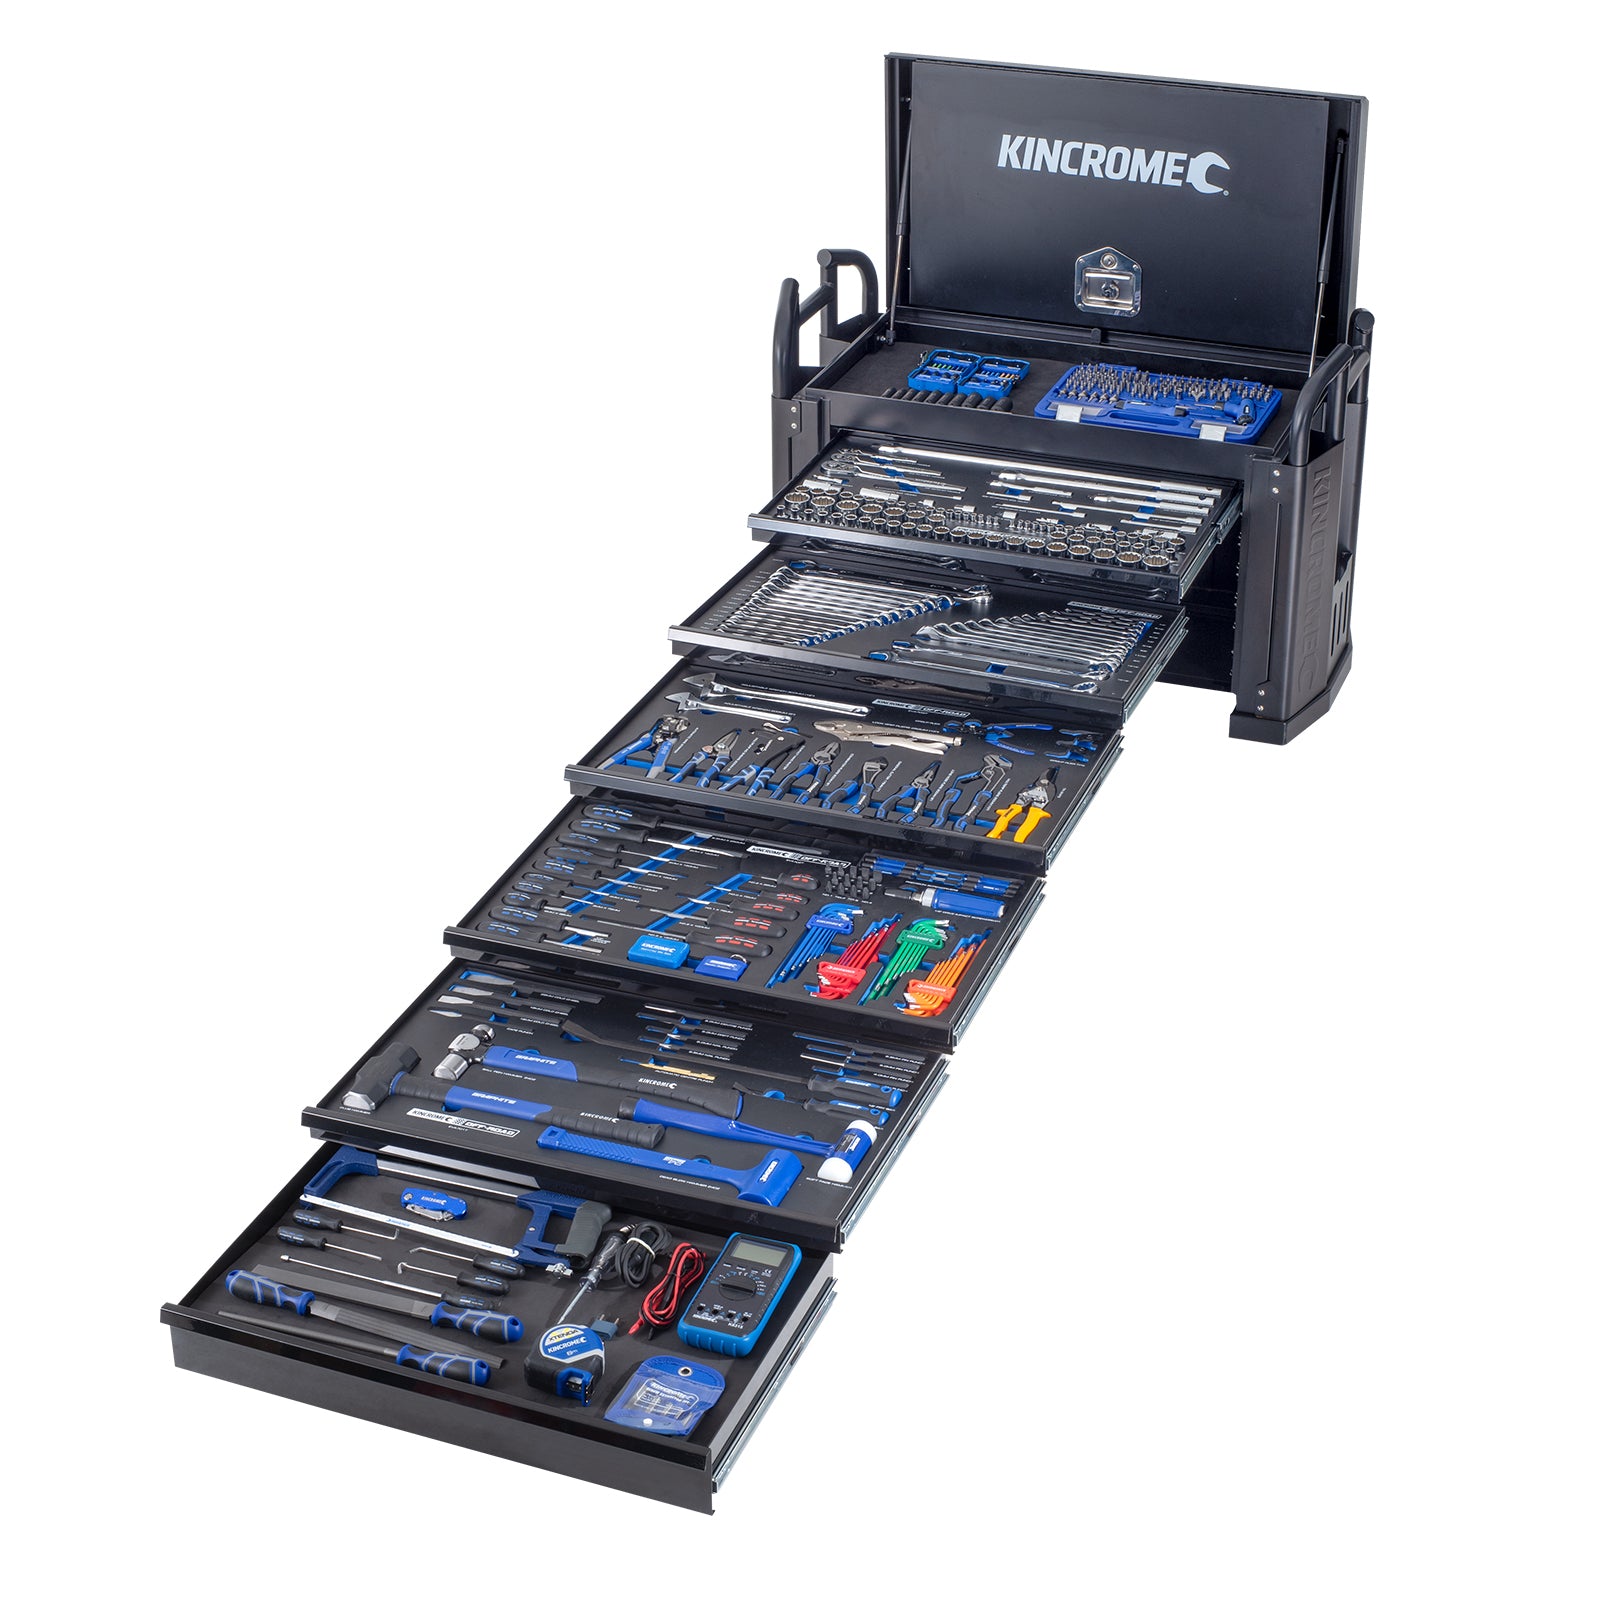 OFF-ROAD Field Service Tool Kit 452 Piece 6 Drawer 39" Black - P1830 by Kincrome